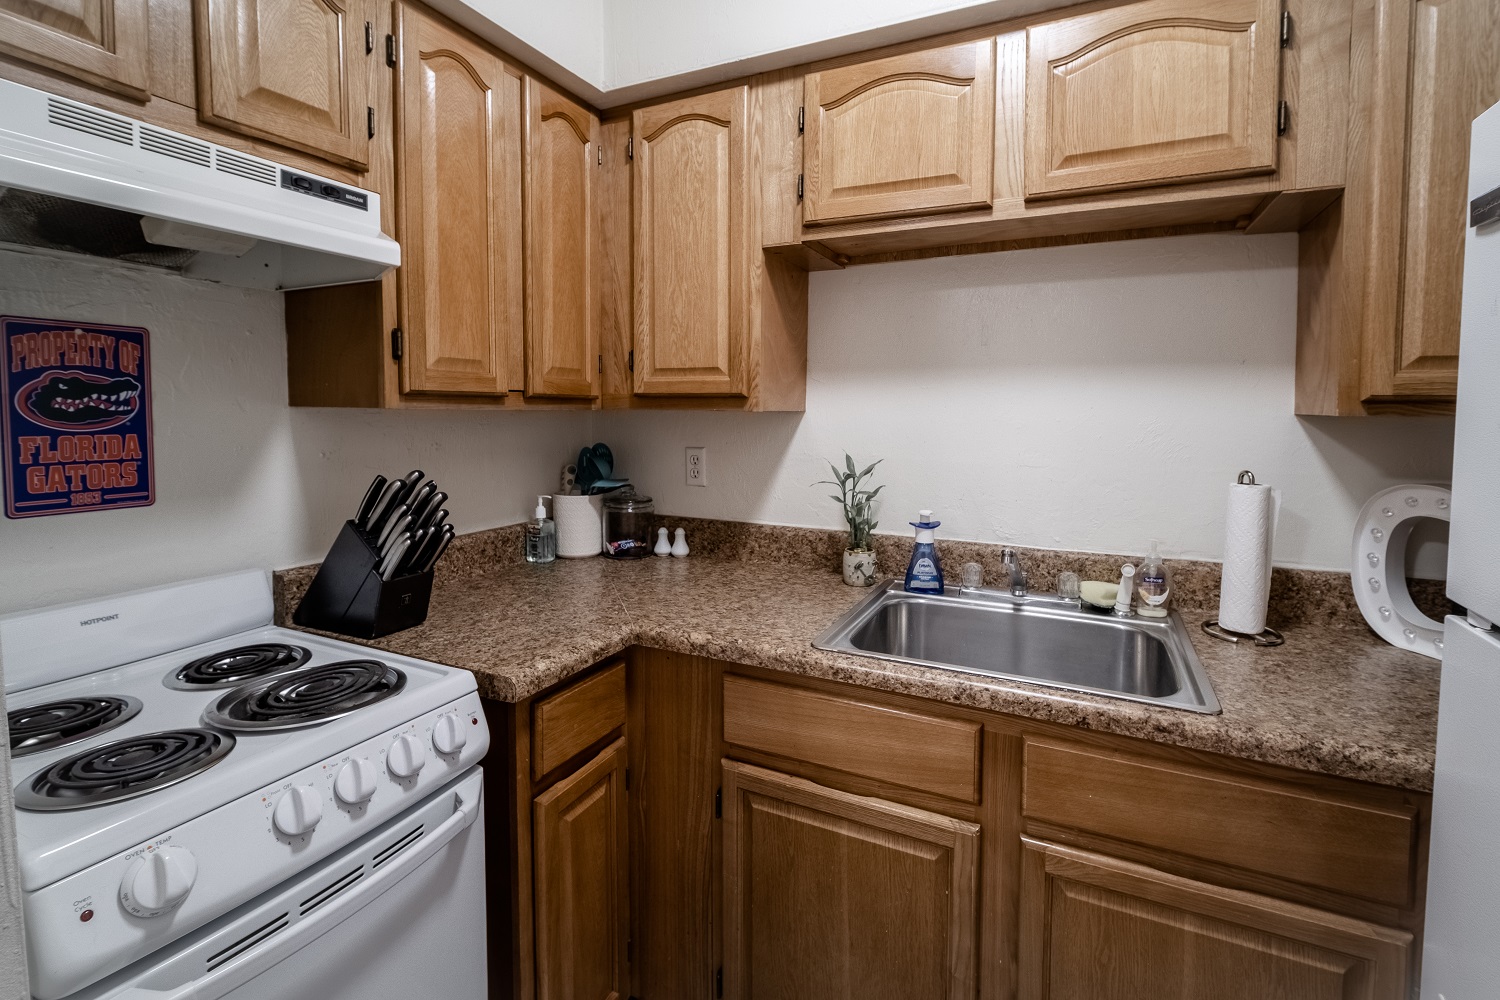 Newly remodeled kitchens